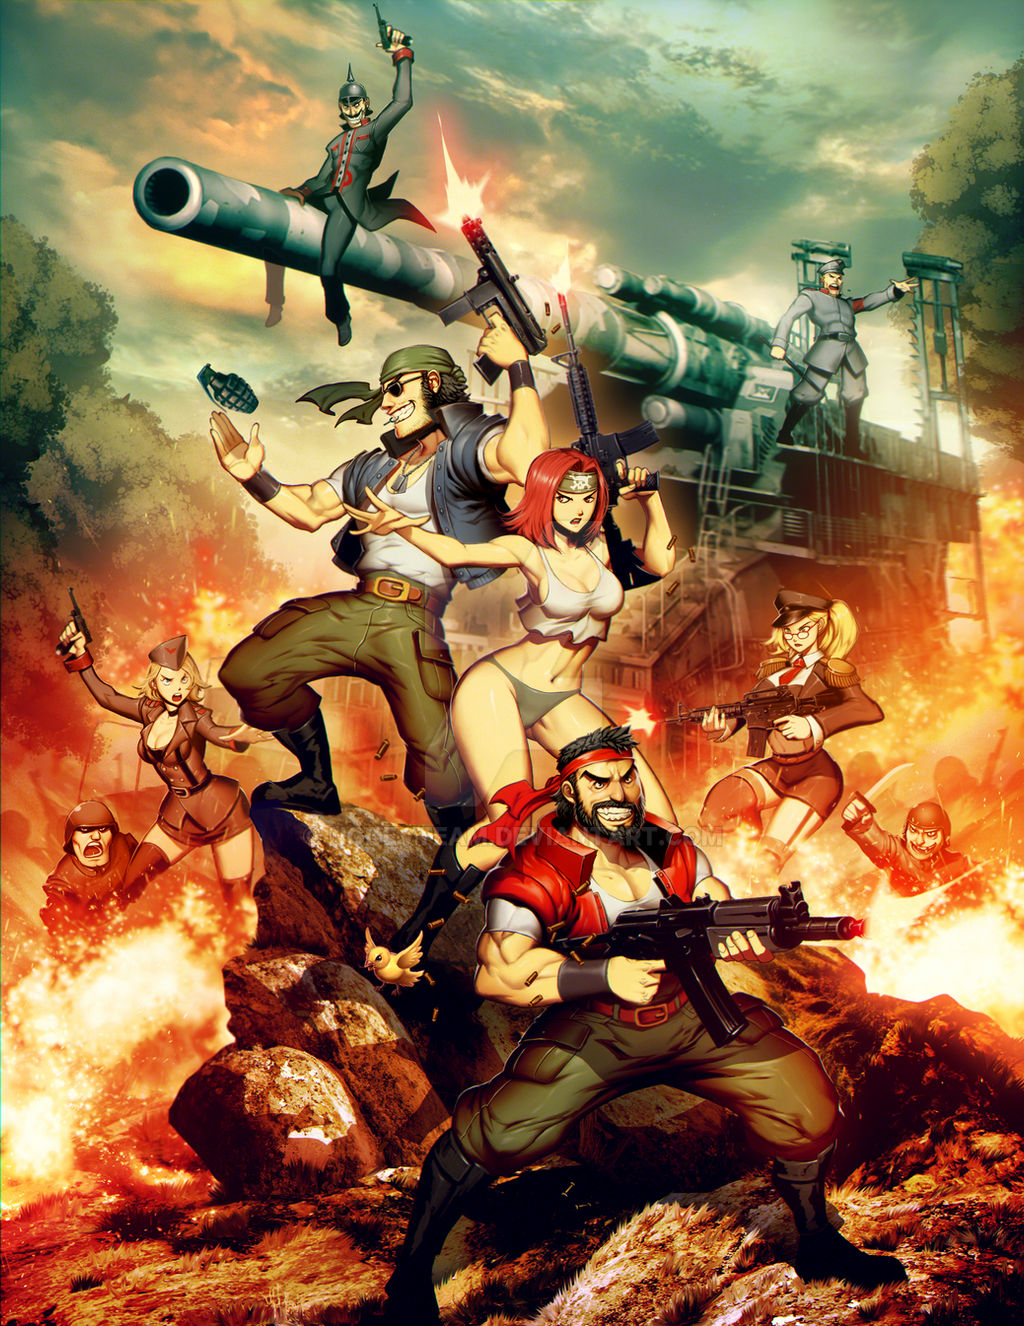 3girls 5boys aiming angry assault_rifle bandana battle beard bikini blonde_hair boots breasts camouflage cannon character_request clenched_teeth clouds cover explosive facial_hair fire firing genzoman germany glasses grenade grin gun handgun hat helmet highres jolly_roger knife kraut_busters long_hair manly mercenary military military_uniform multiple_boys multiple_girls mustache necktie neo_geo officer official_art outdoors promotional_art redhead rifle rock short_hair shouting smile soldier submachine_gun sunglasses swimsuit tank_top teeth torn_clothes uniform vest video_game_cover weapon